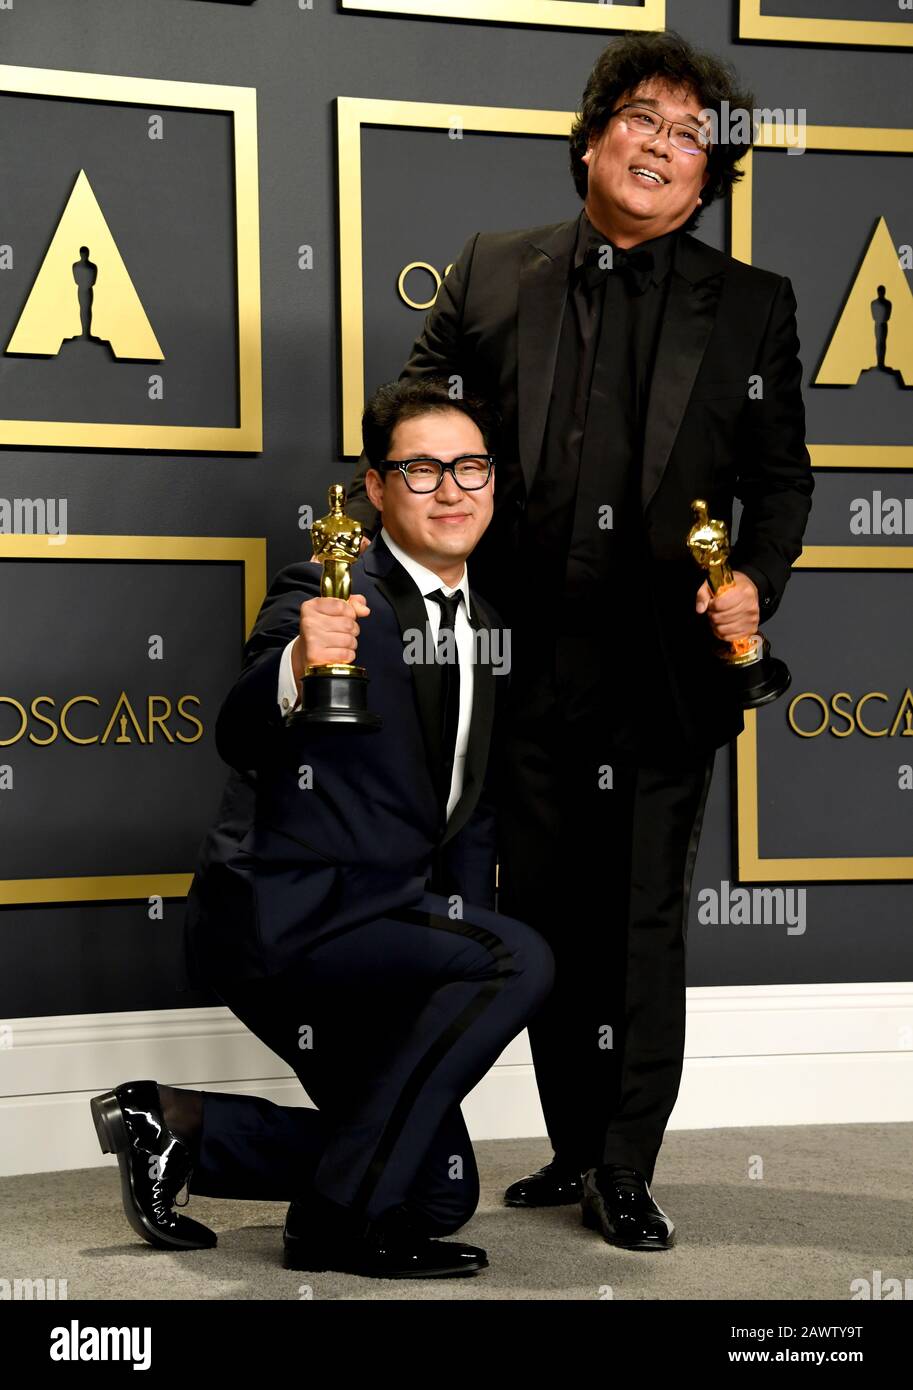 Han Jin-won and Bong Joon-ho with their Oscars for Best Original Screenplay, International Feature Film, Best Director, and Best Picture for Parasite in the press room at the 92nd Academy Awards held at the Dolby Theatre in Hollywood, Los Angeles, USA. Stock Photo